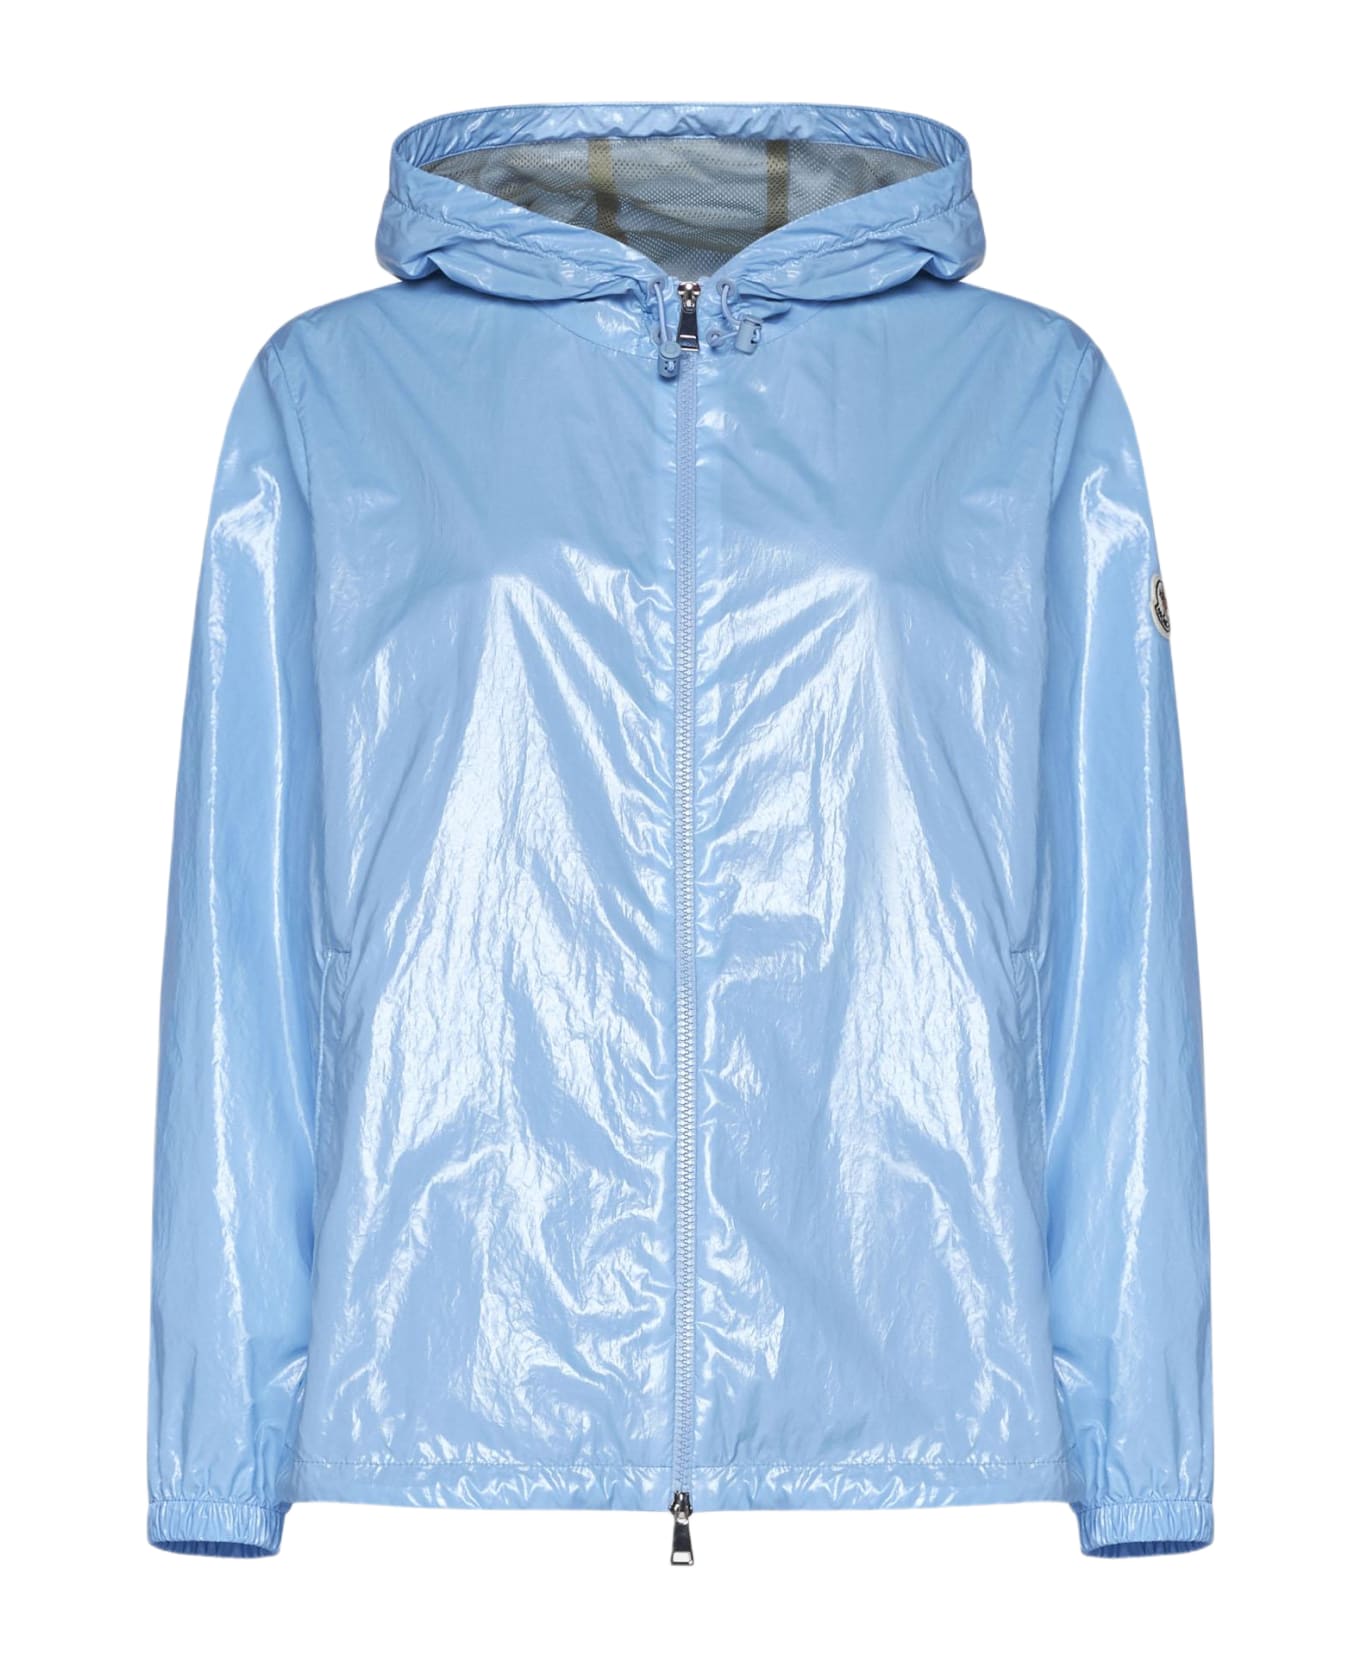 Moncler Wuisse Waxed Cotton Jacket - Clear Blue ジャケット